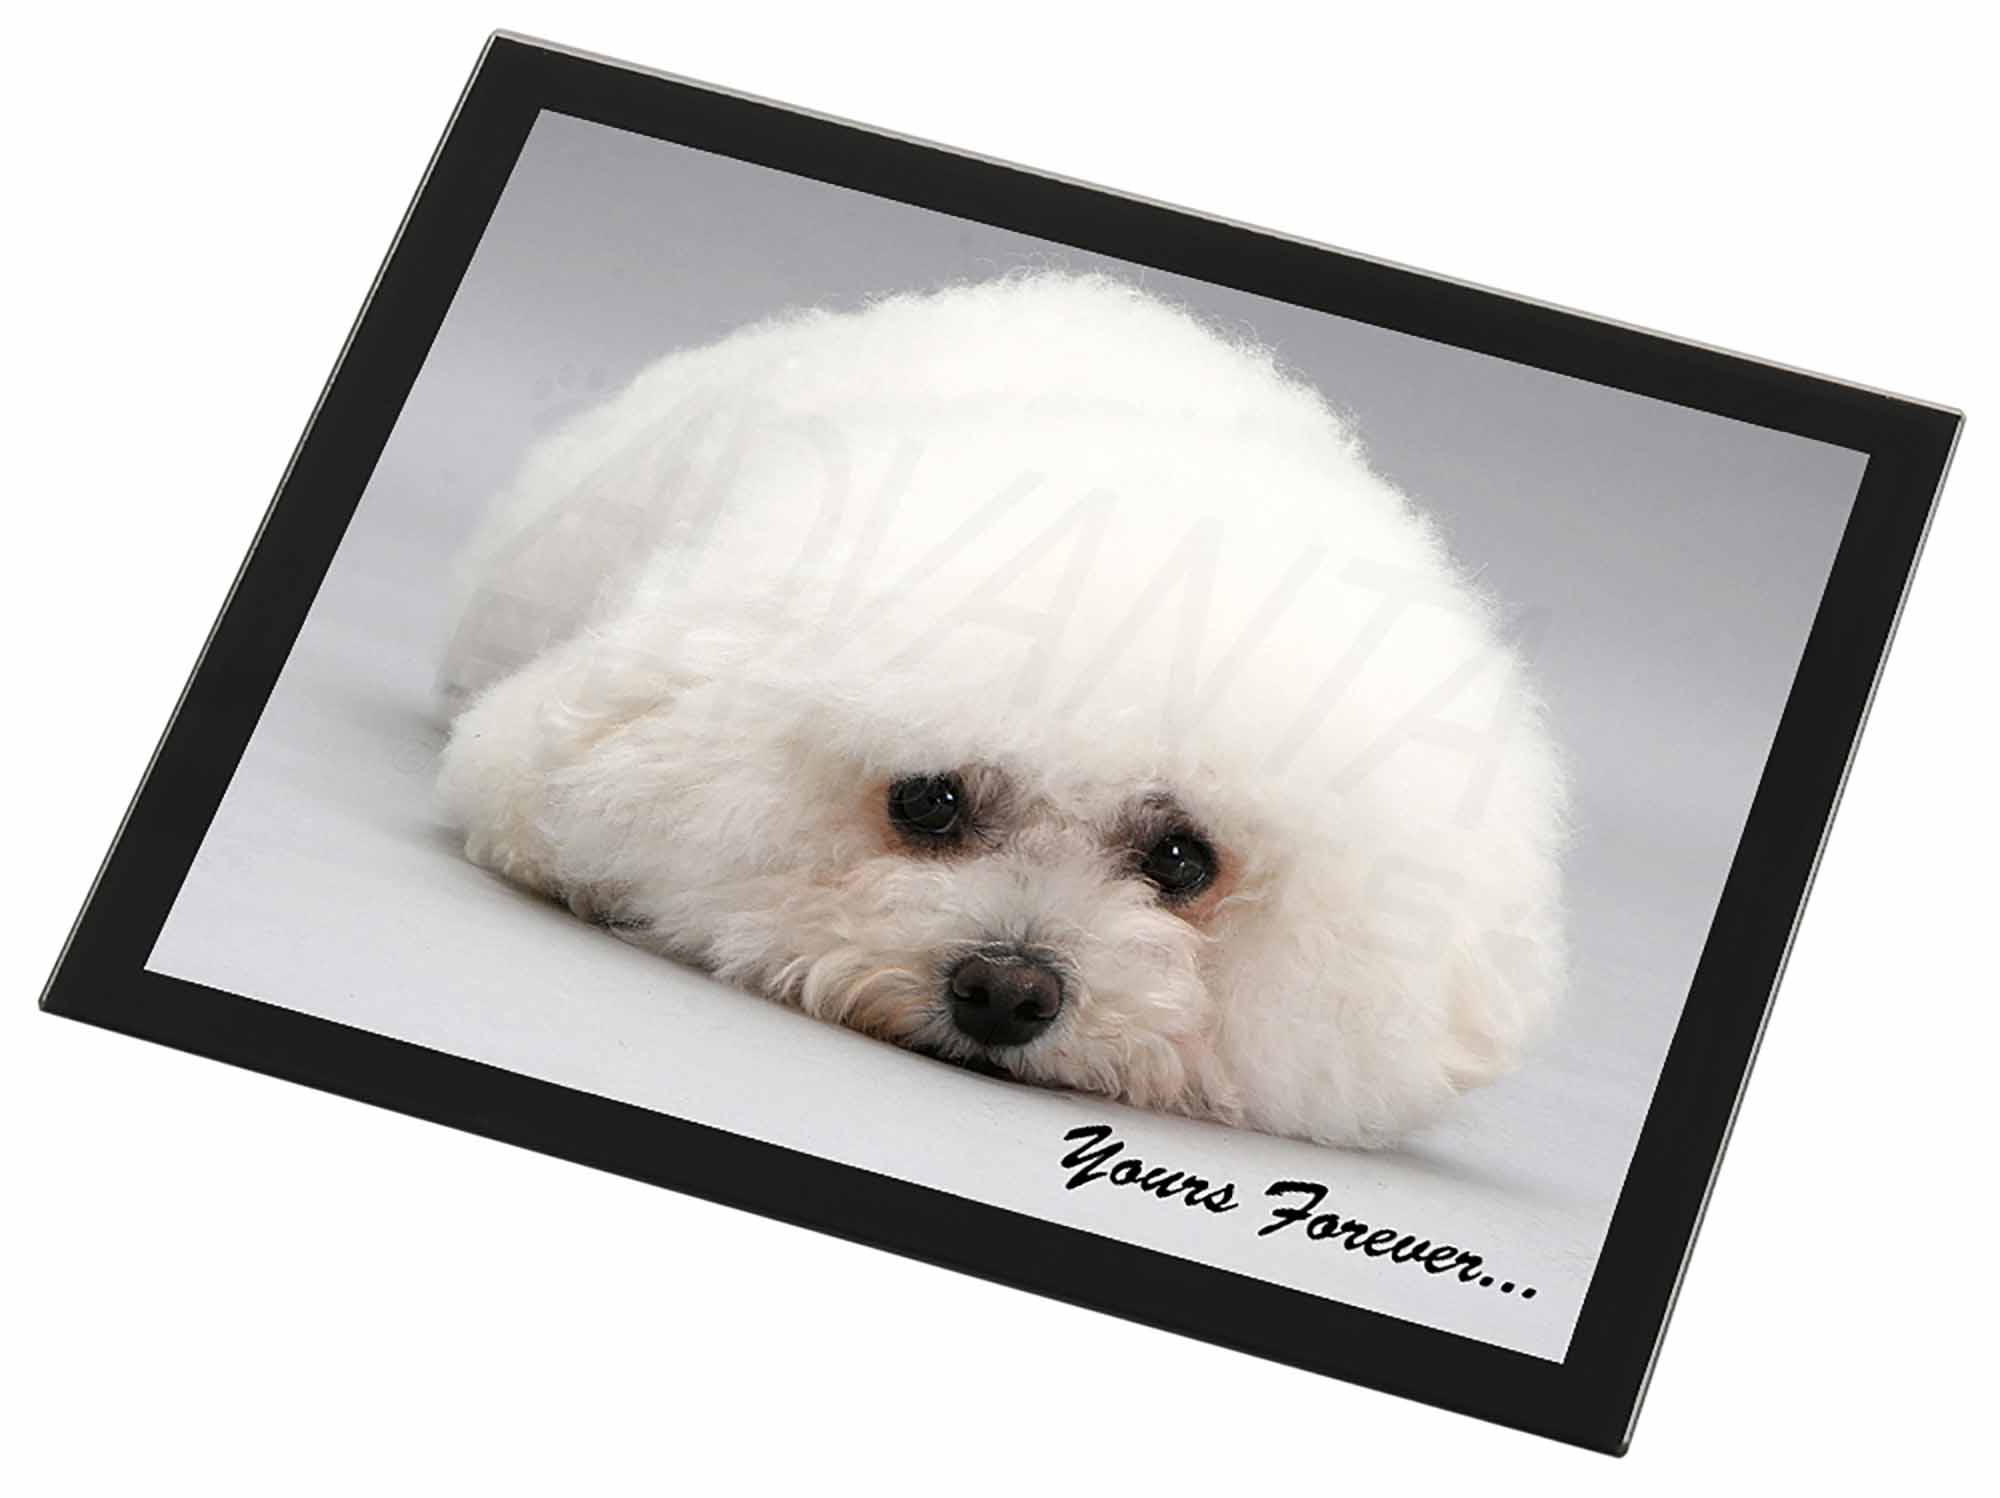 Bichon Frise Dog 'Yours Forever' Black Rim Glass Coaster Animal Breed AD-BF3GC 